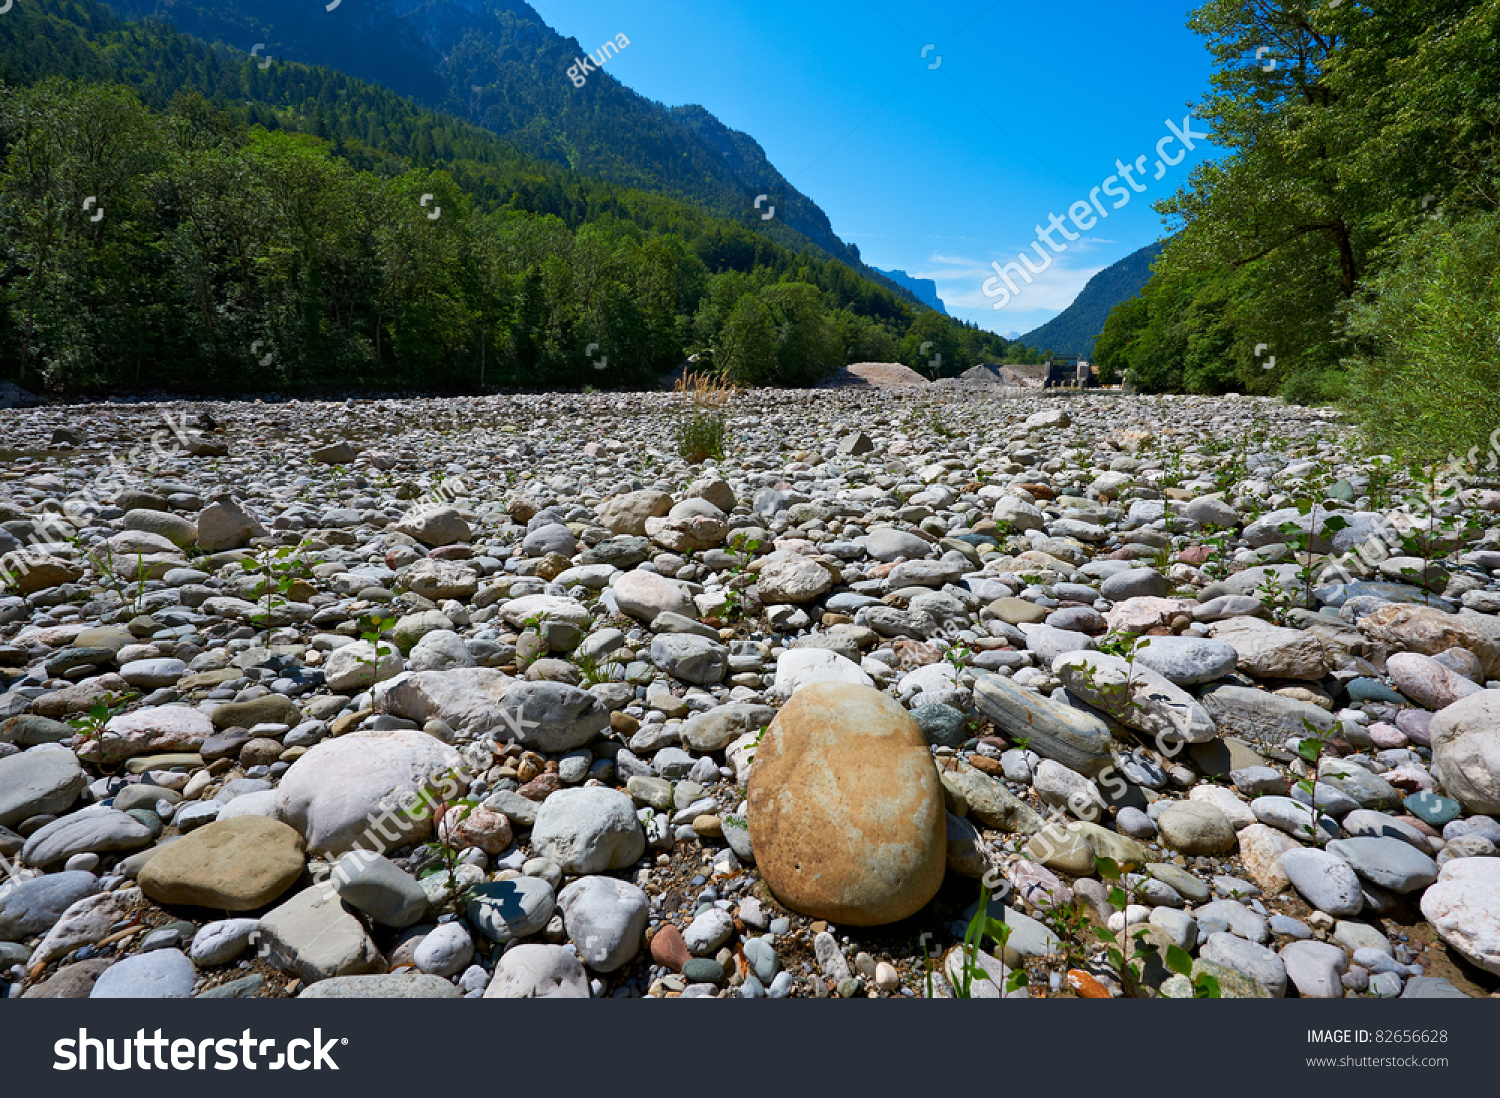 stock-photo-dry-river-bed-in-the-bavarian-alps-germany-82656628.jpg